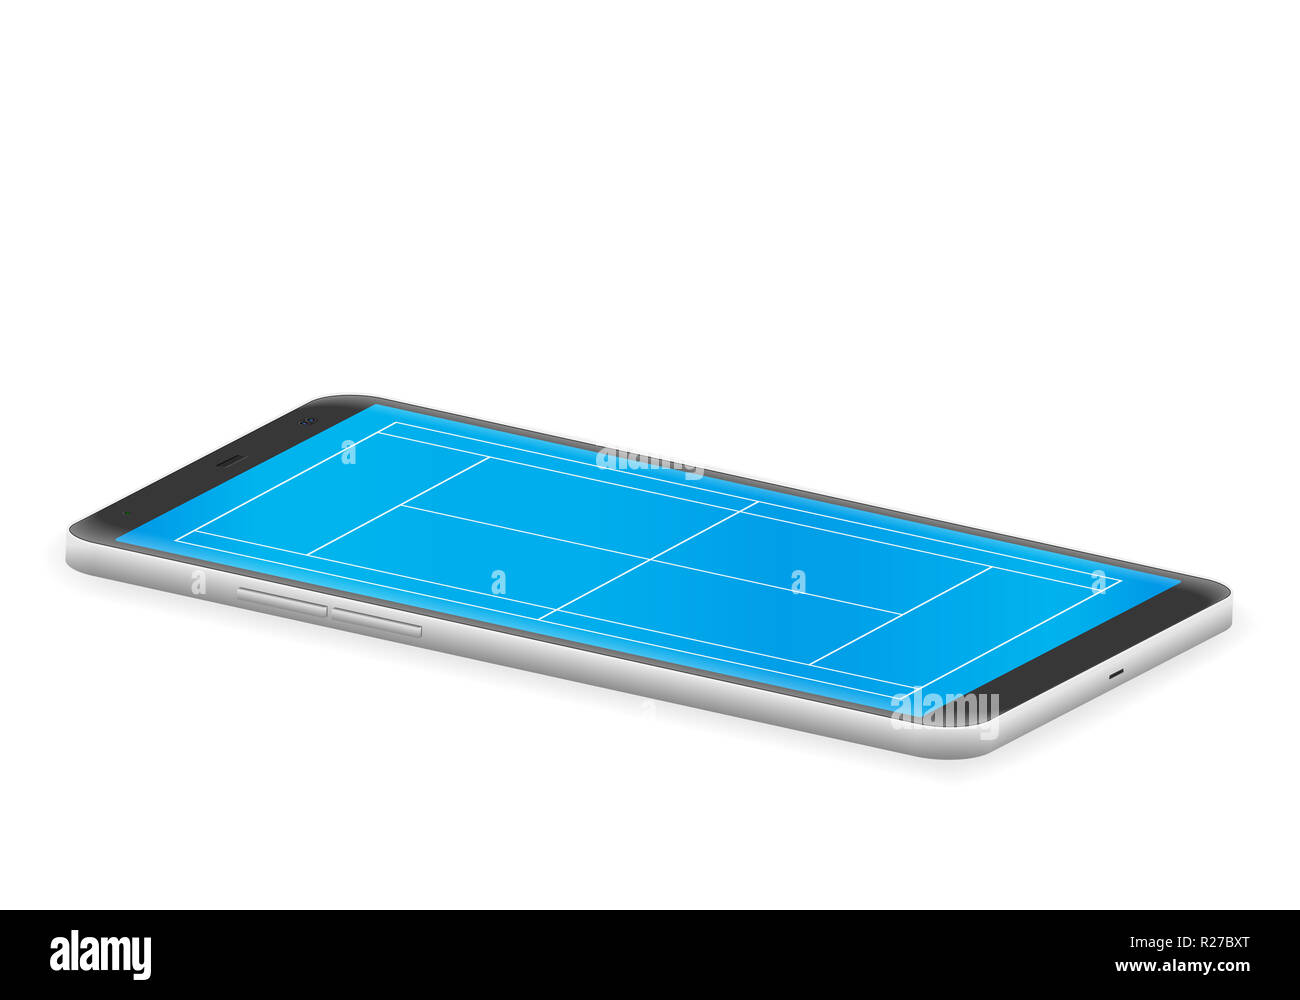 Smart phone tennis court on a white background Stock Photo - Alamy